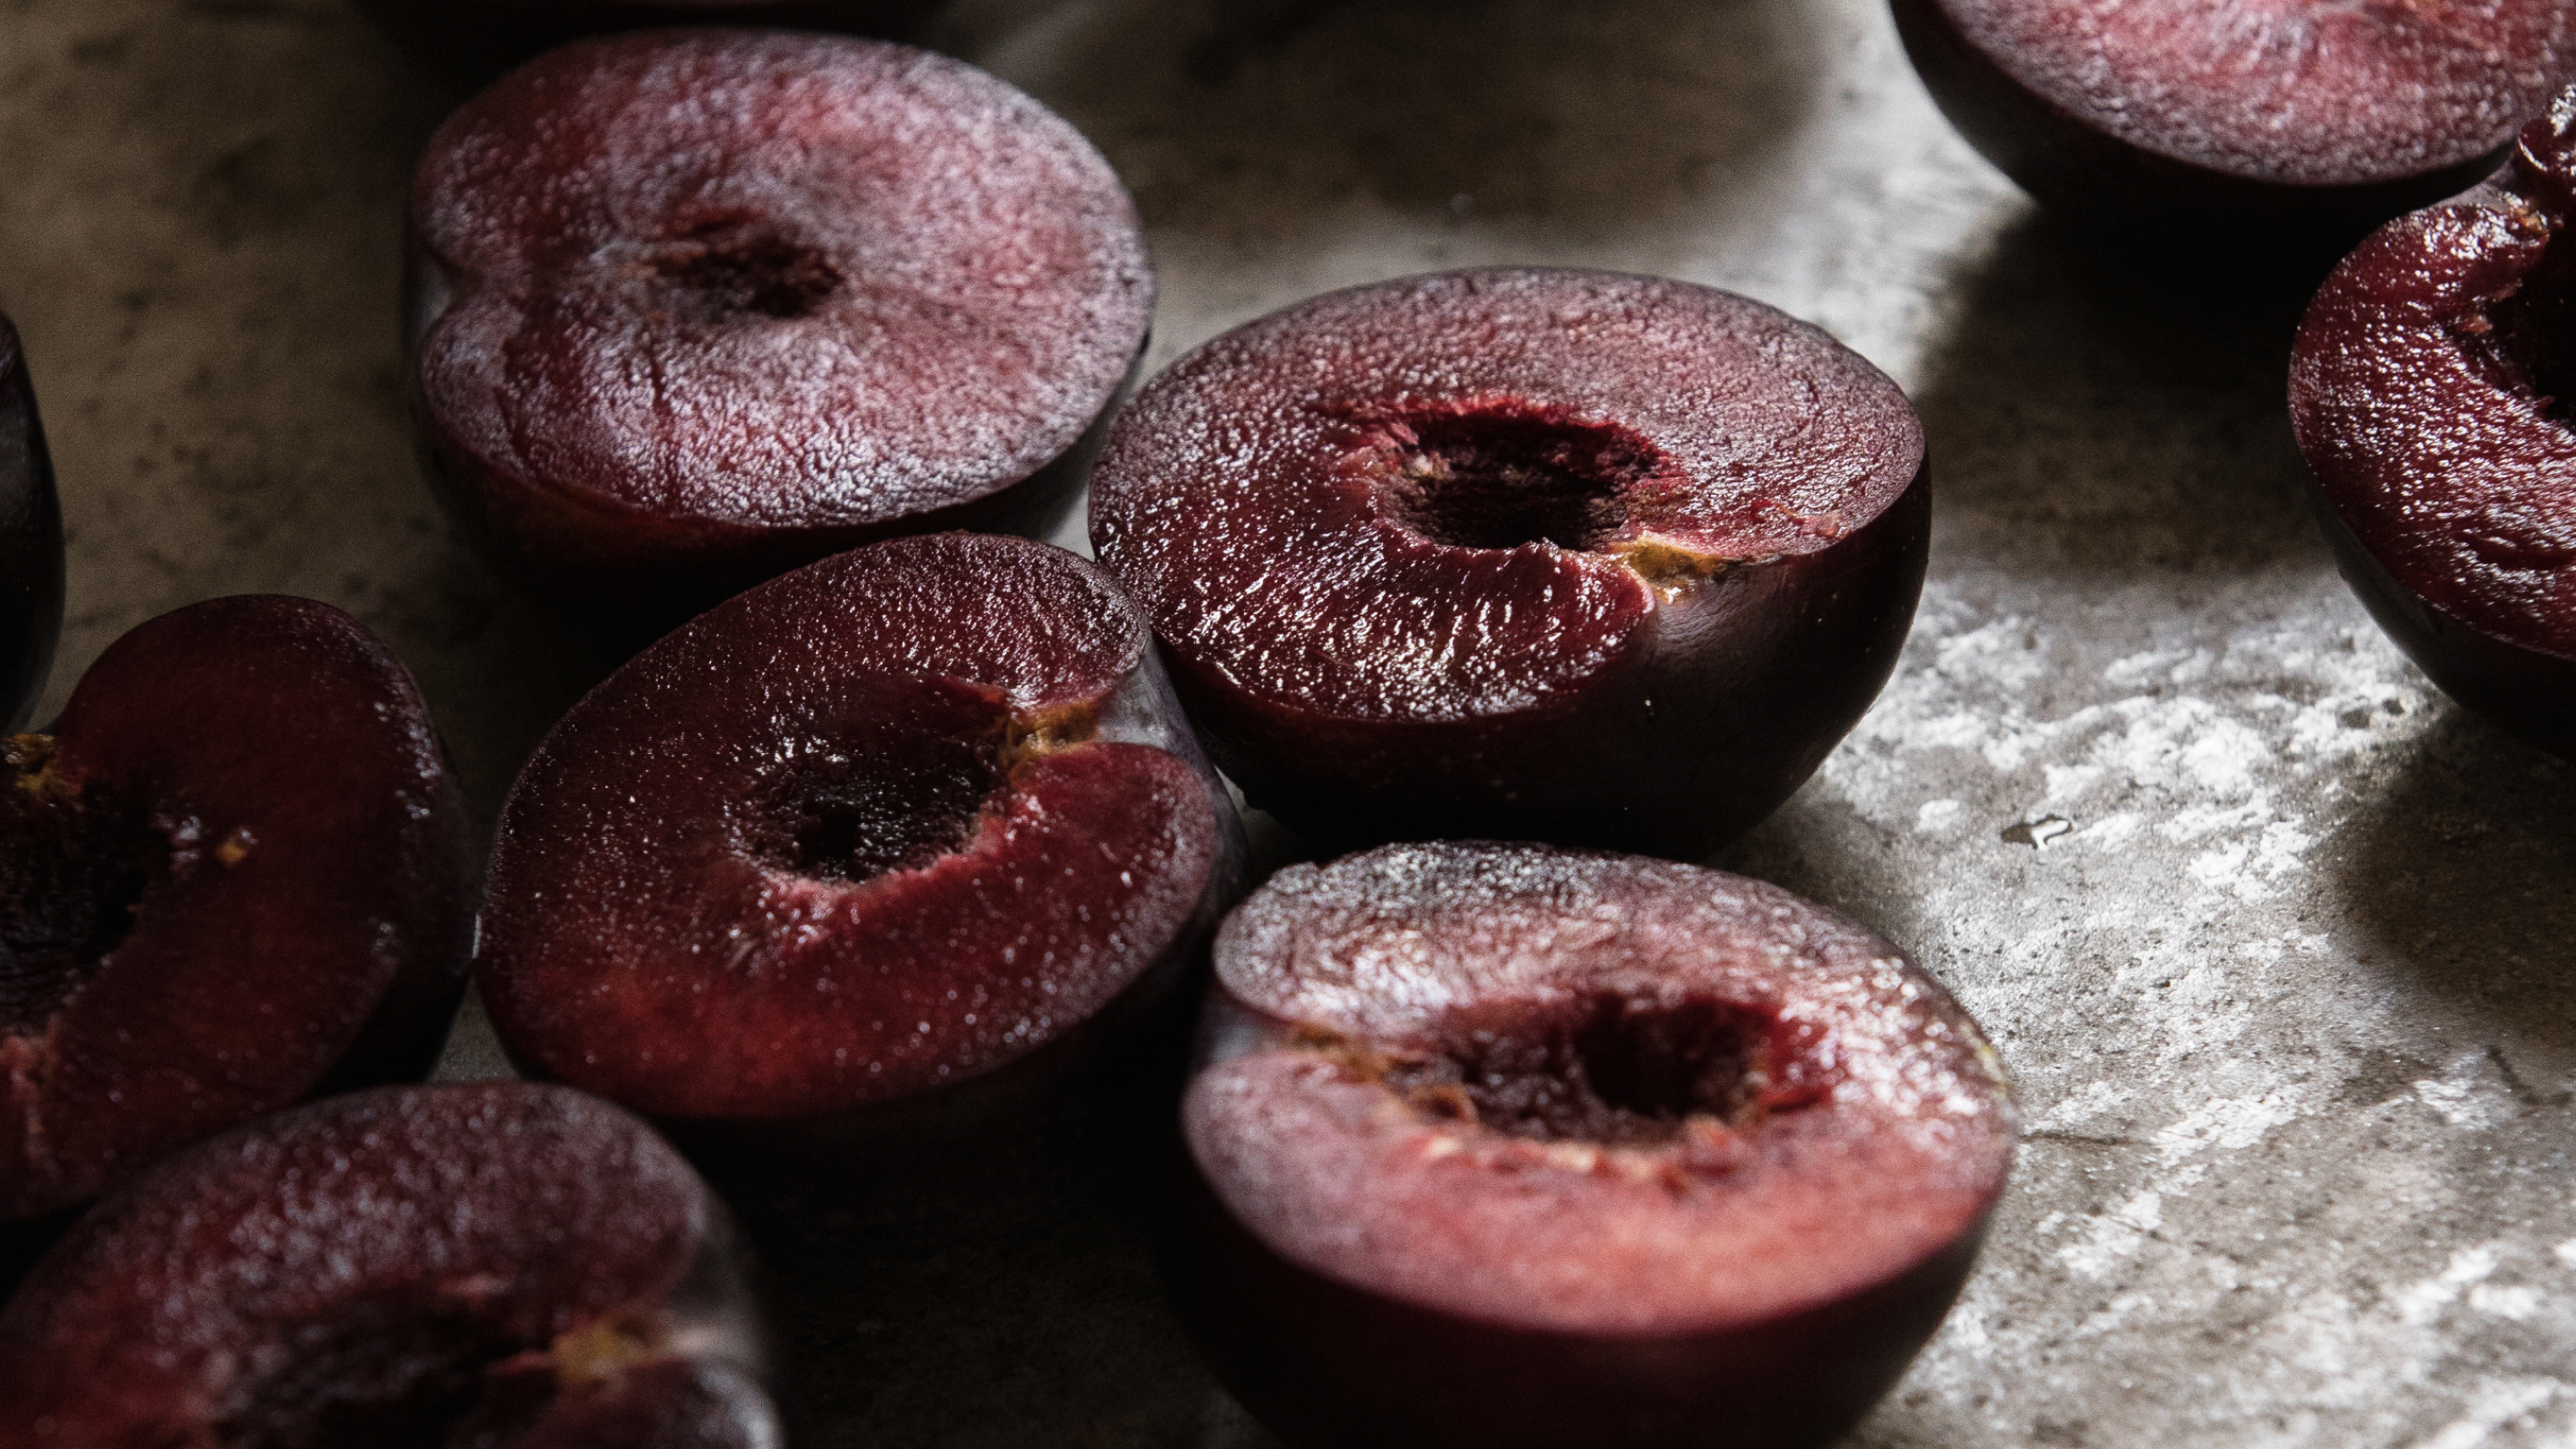 A selection of Queen Garnet plums sliced in half, showing the ripe insides of the fruit